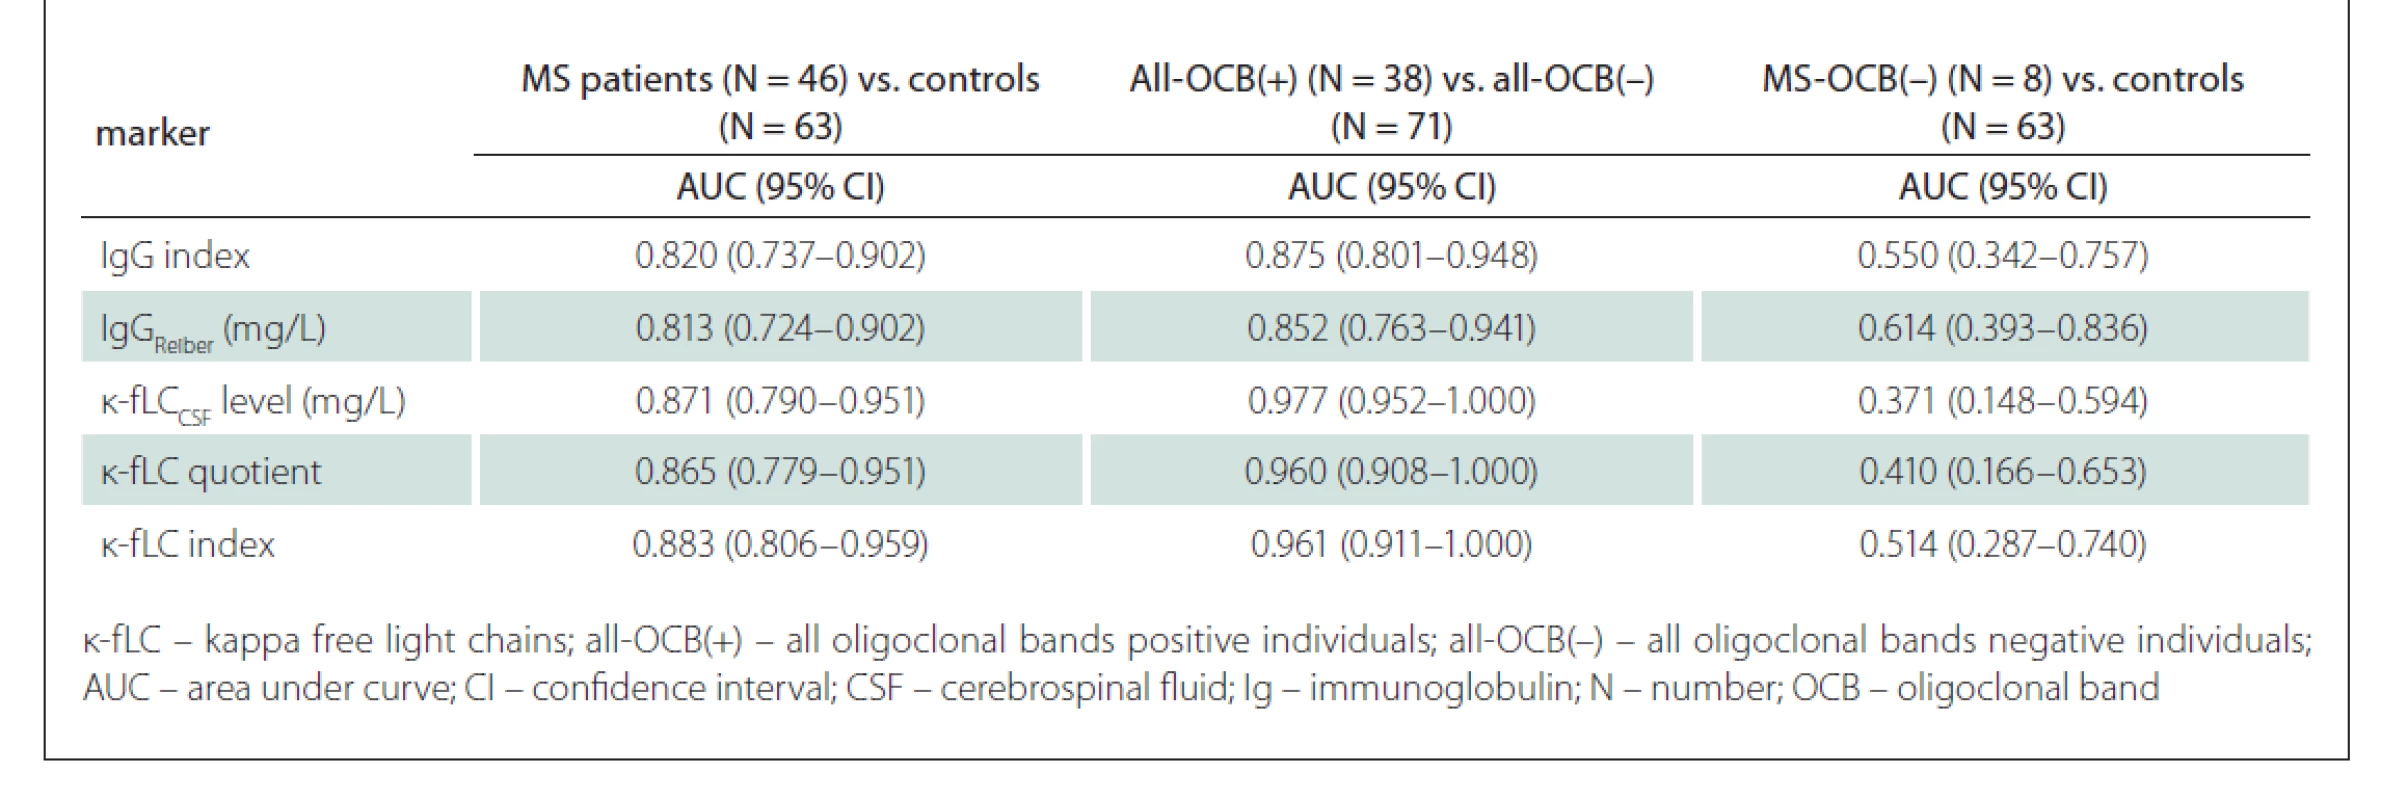 AUC values and confi dency intervals for analysed markers of intrathecal Ig synthesis.